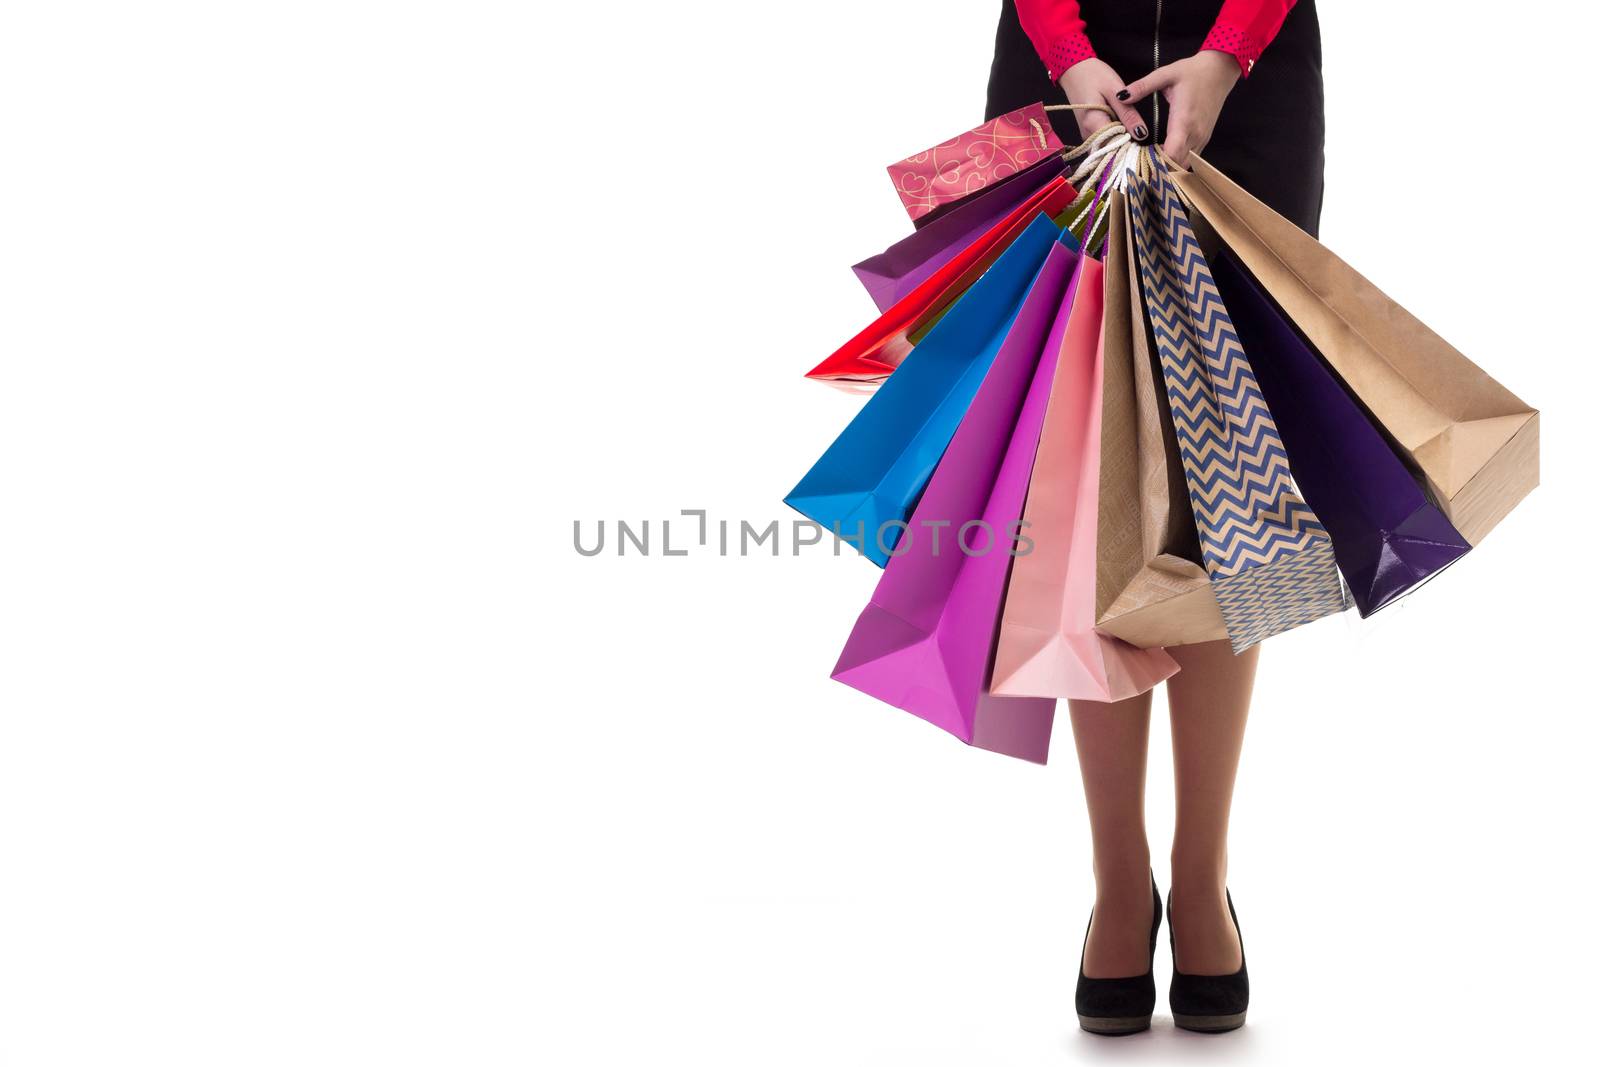 Lower close-up of standing woman wearing short skirt and shoes with high hills holding multicolored shopping paper bags and packages, isolated on white background